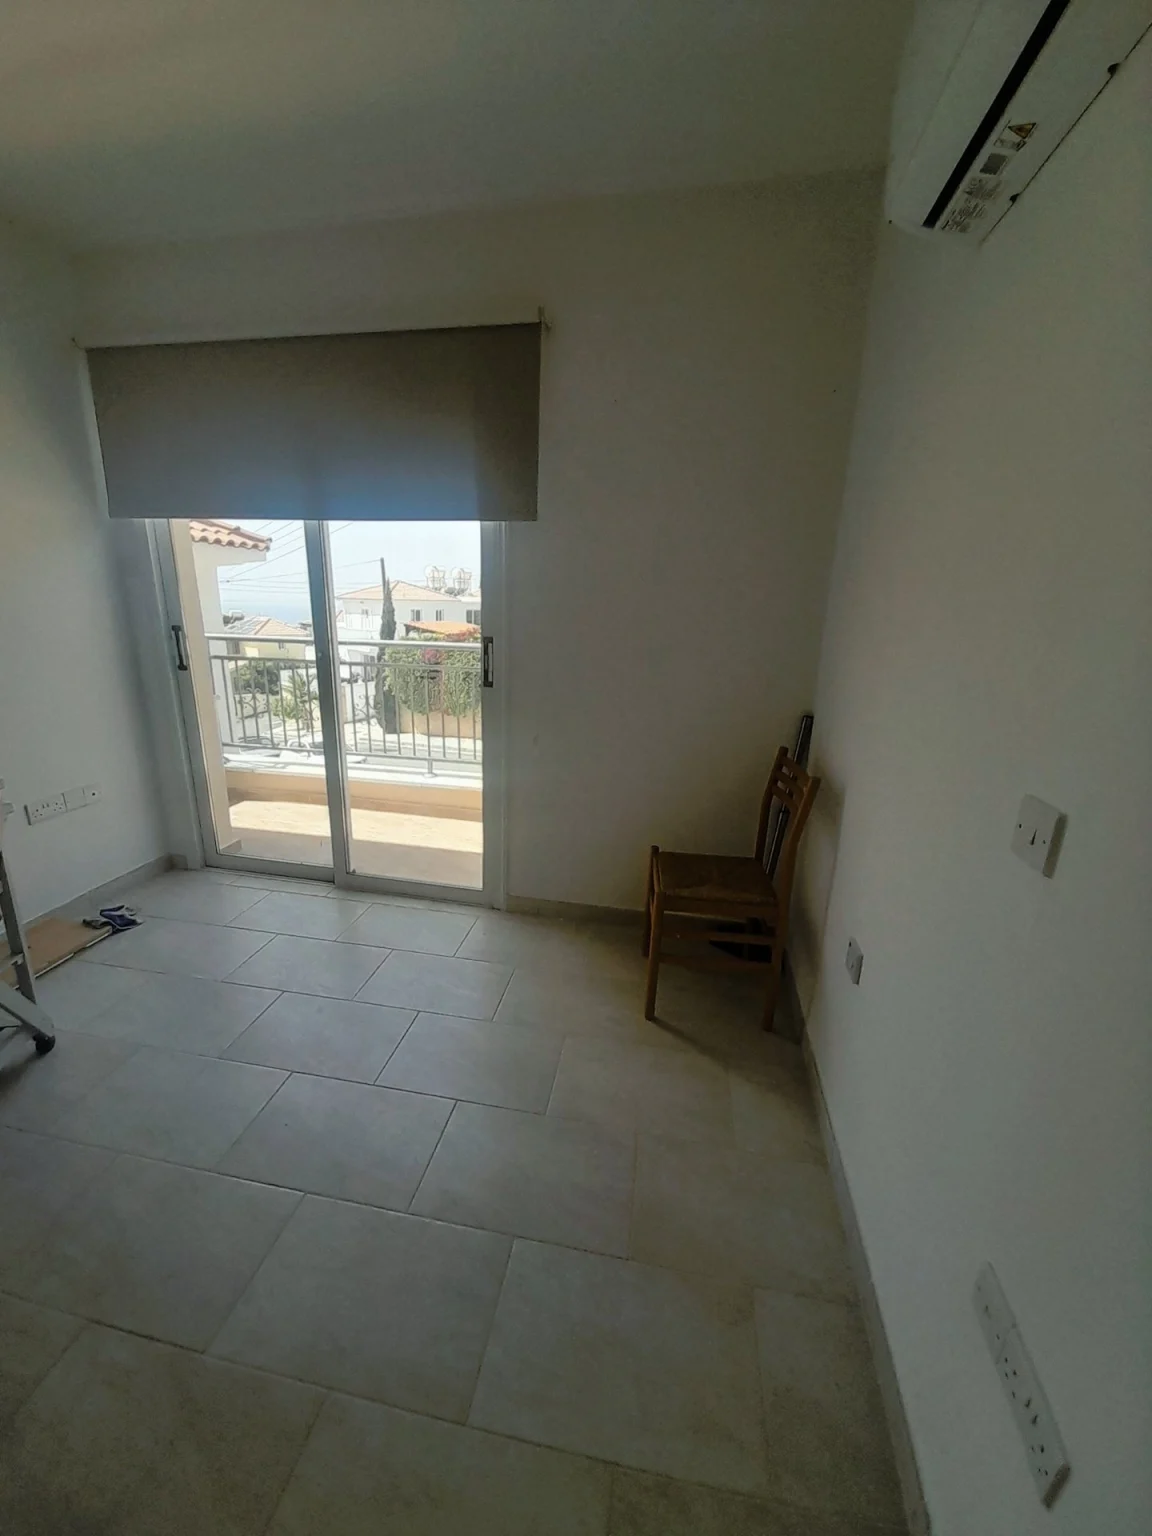 2 Bedroom House for Rent in Peyia, Paphos District